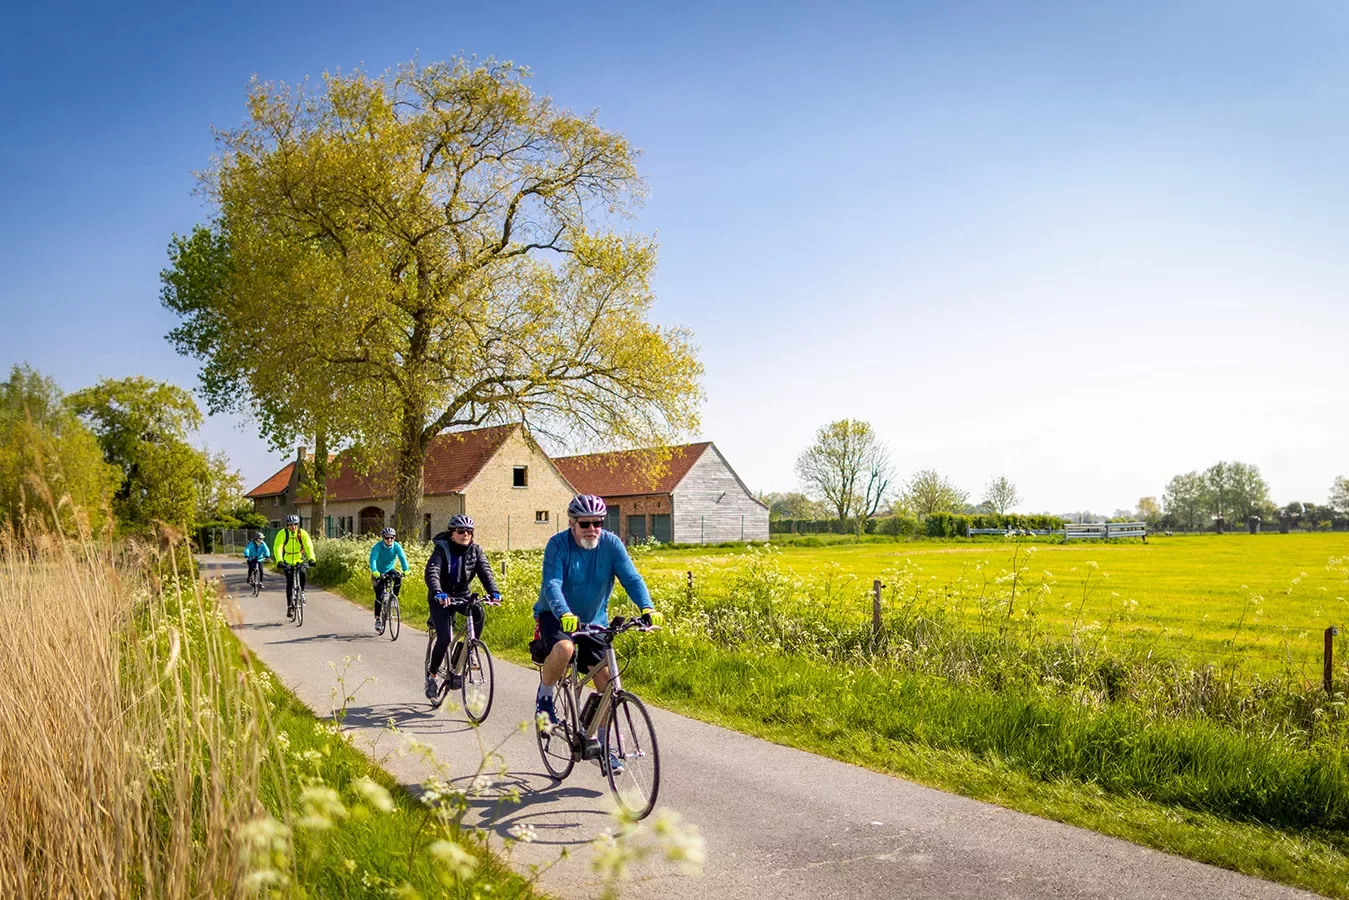 Guests biking in the countryside